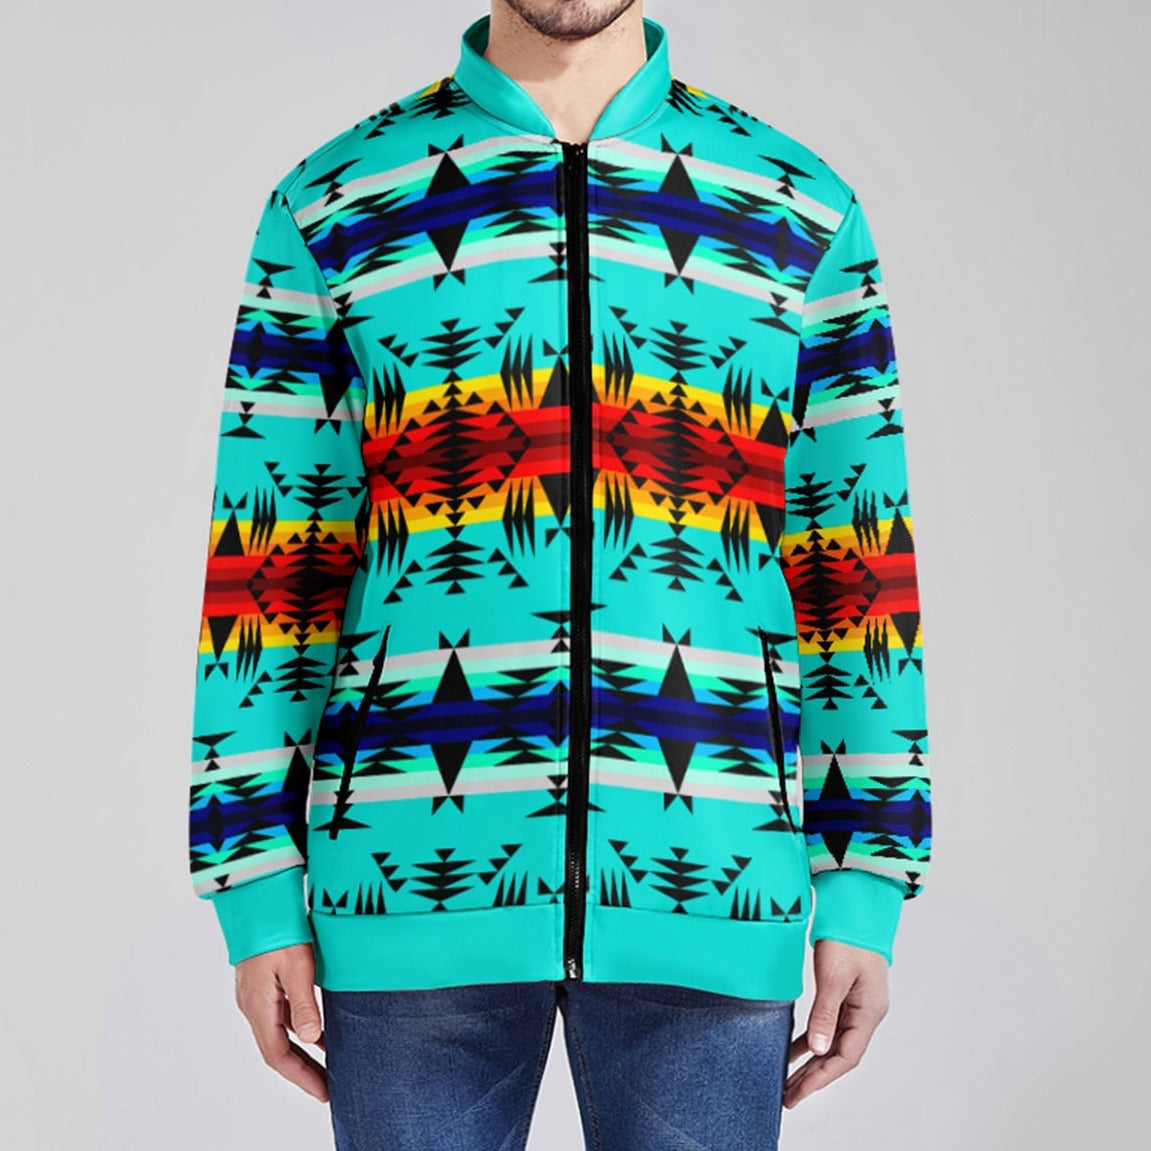 Between the Mountains Youth Zippered Collared Lightweight Jacket